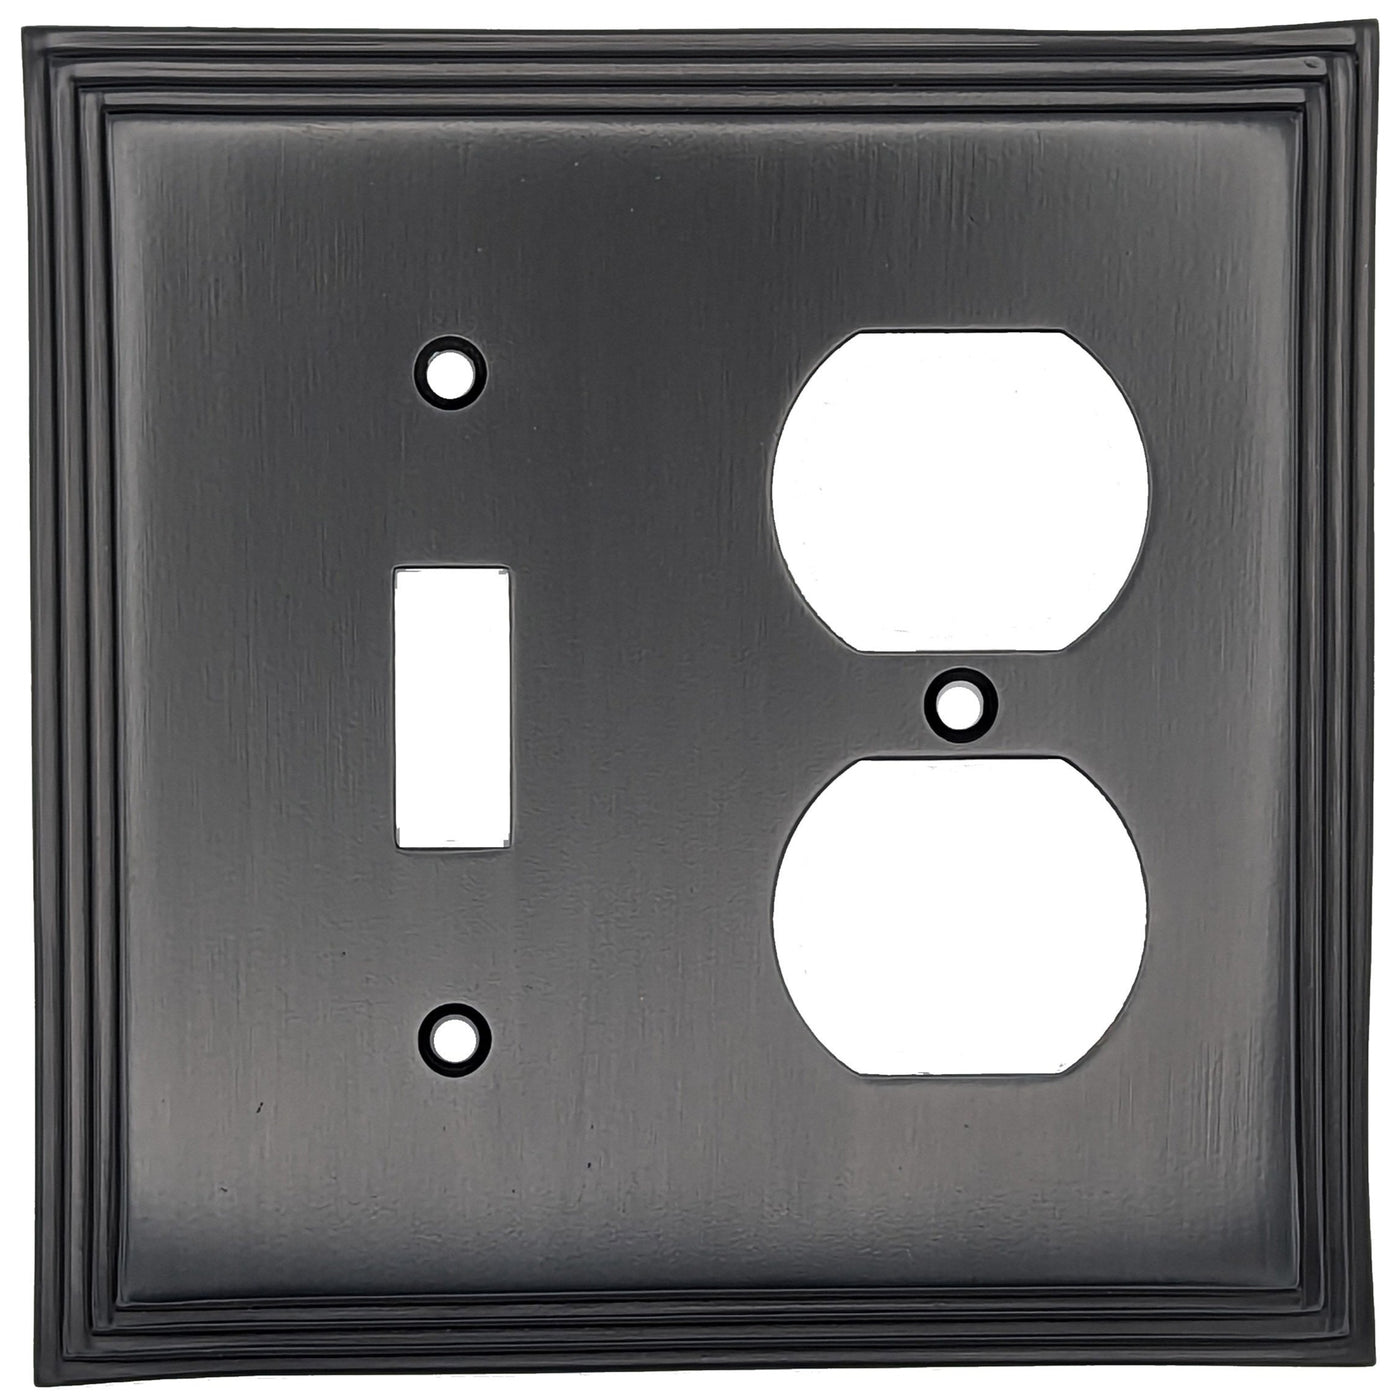 Kingston Classic Stepped Wall Plate (Oil Rubbed Bronze)